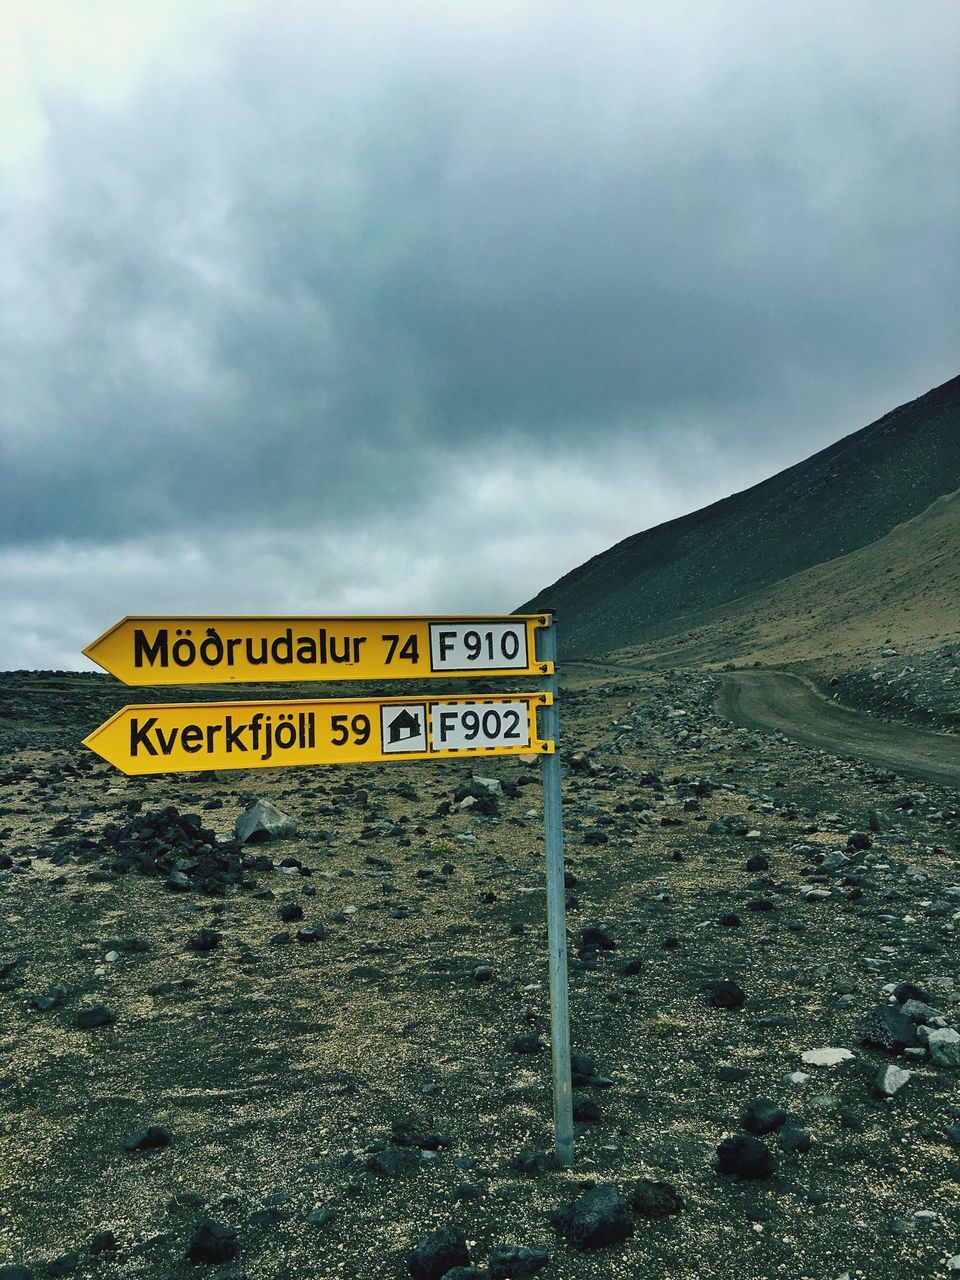 text, western script, communication, information sign, yellow, information, sky, symbol, signboard, cloud, outdoors, sign board, day, cloud - sky, journey, mountain, no people, cloudy